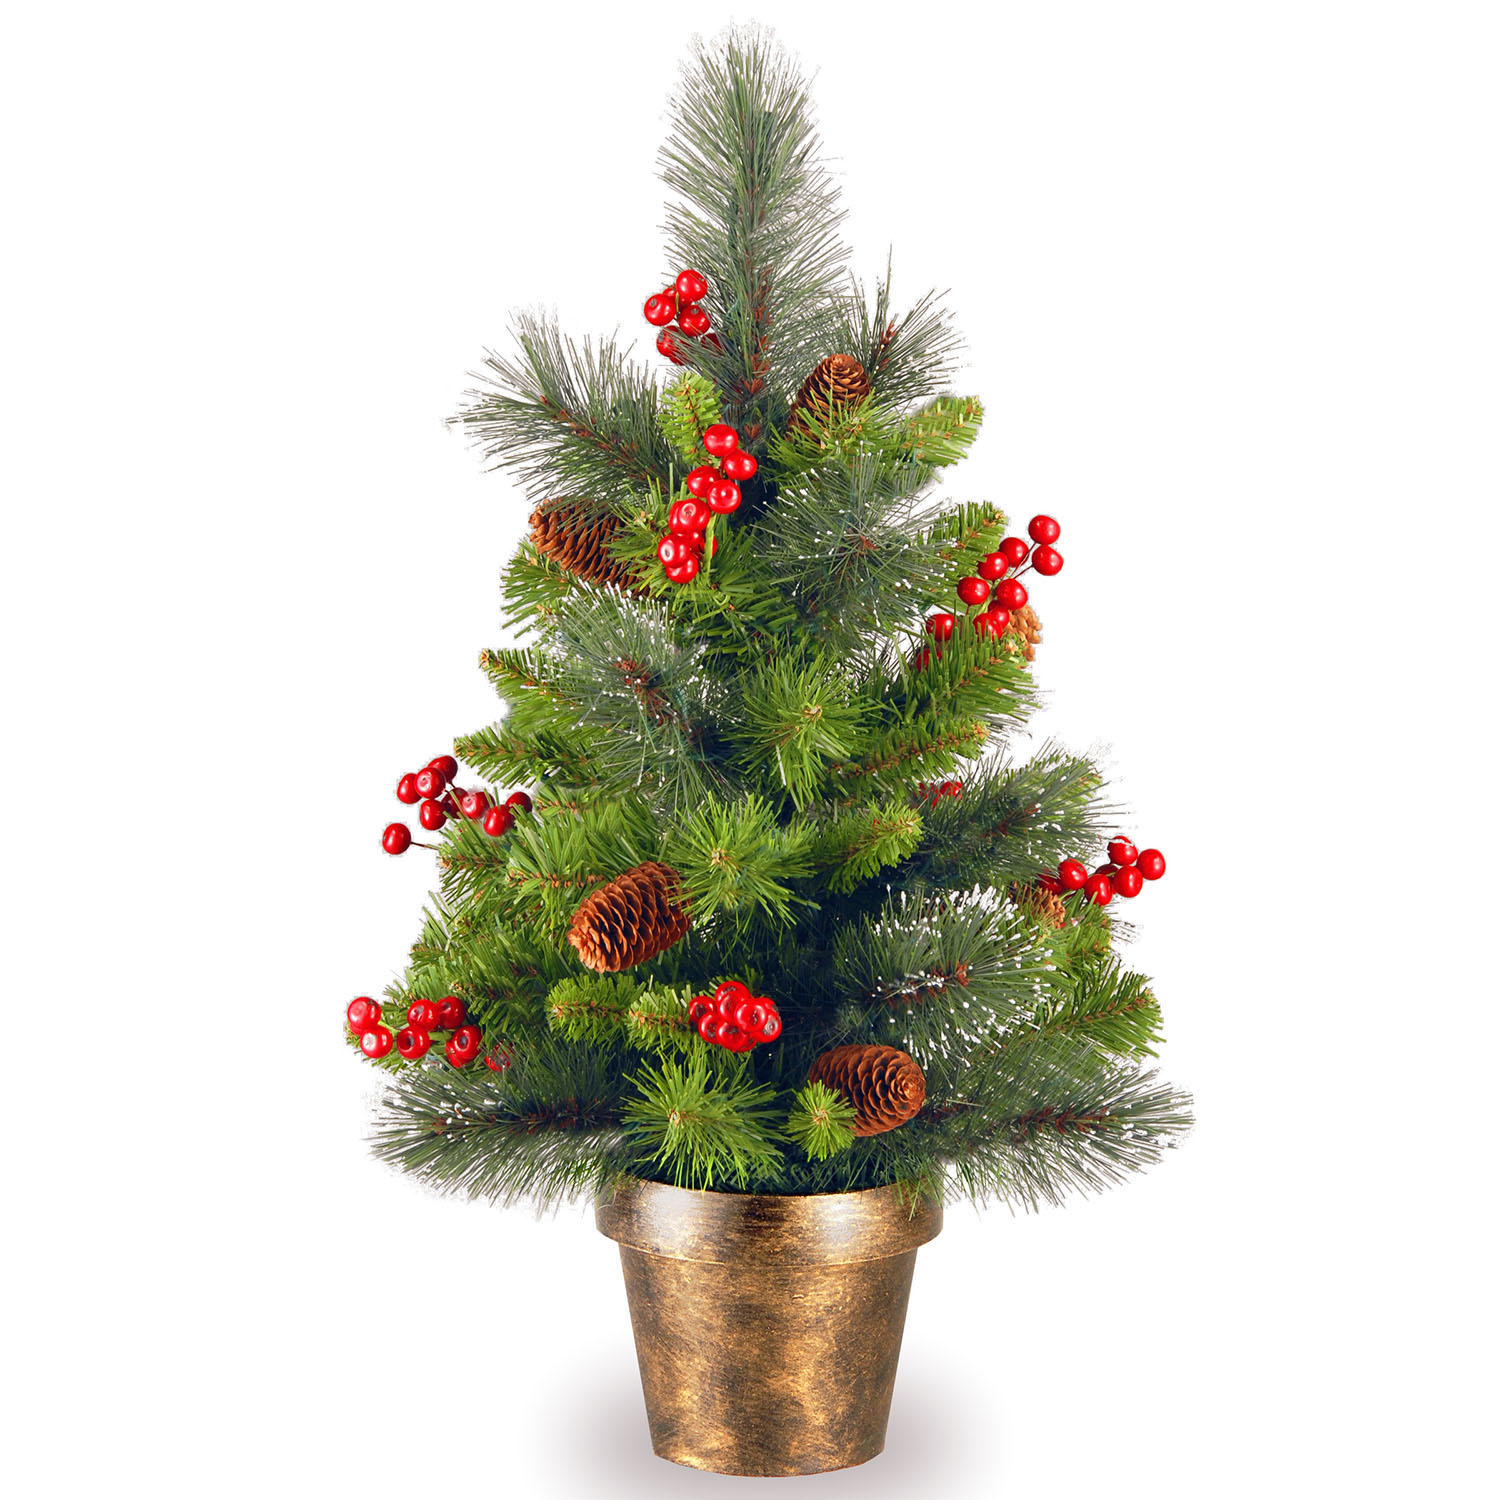 2 Foot Crestwood Spruce Small Tree: Planter